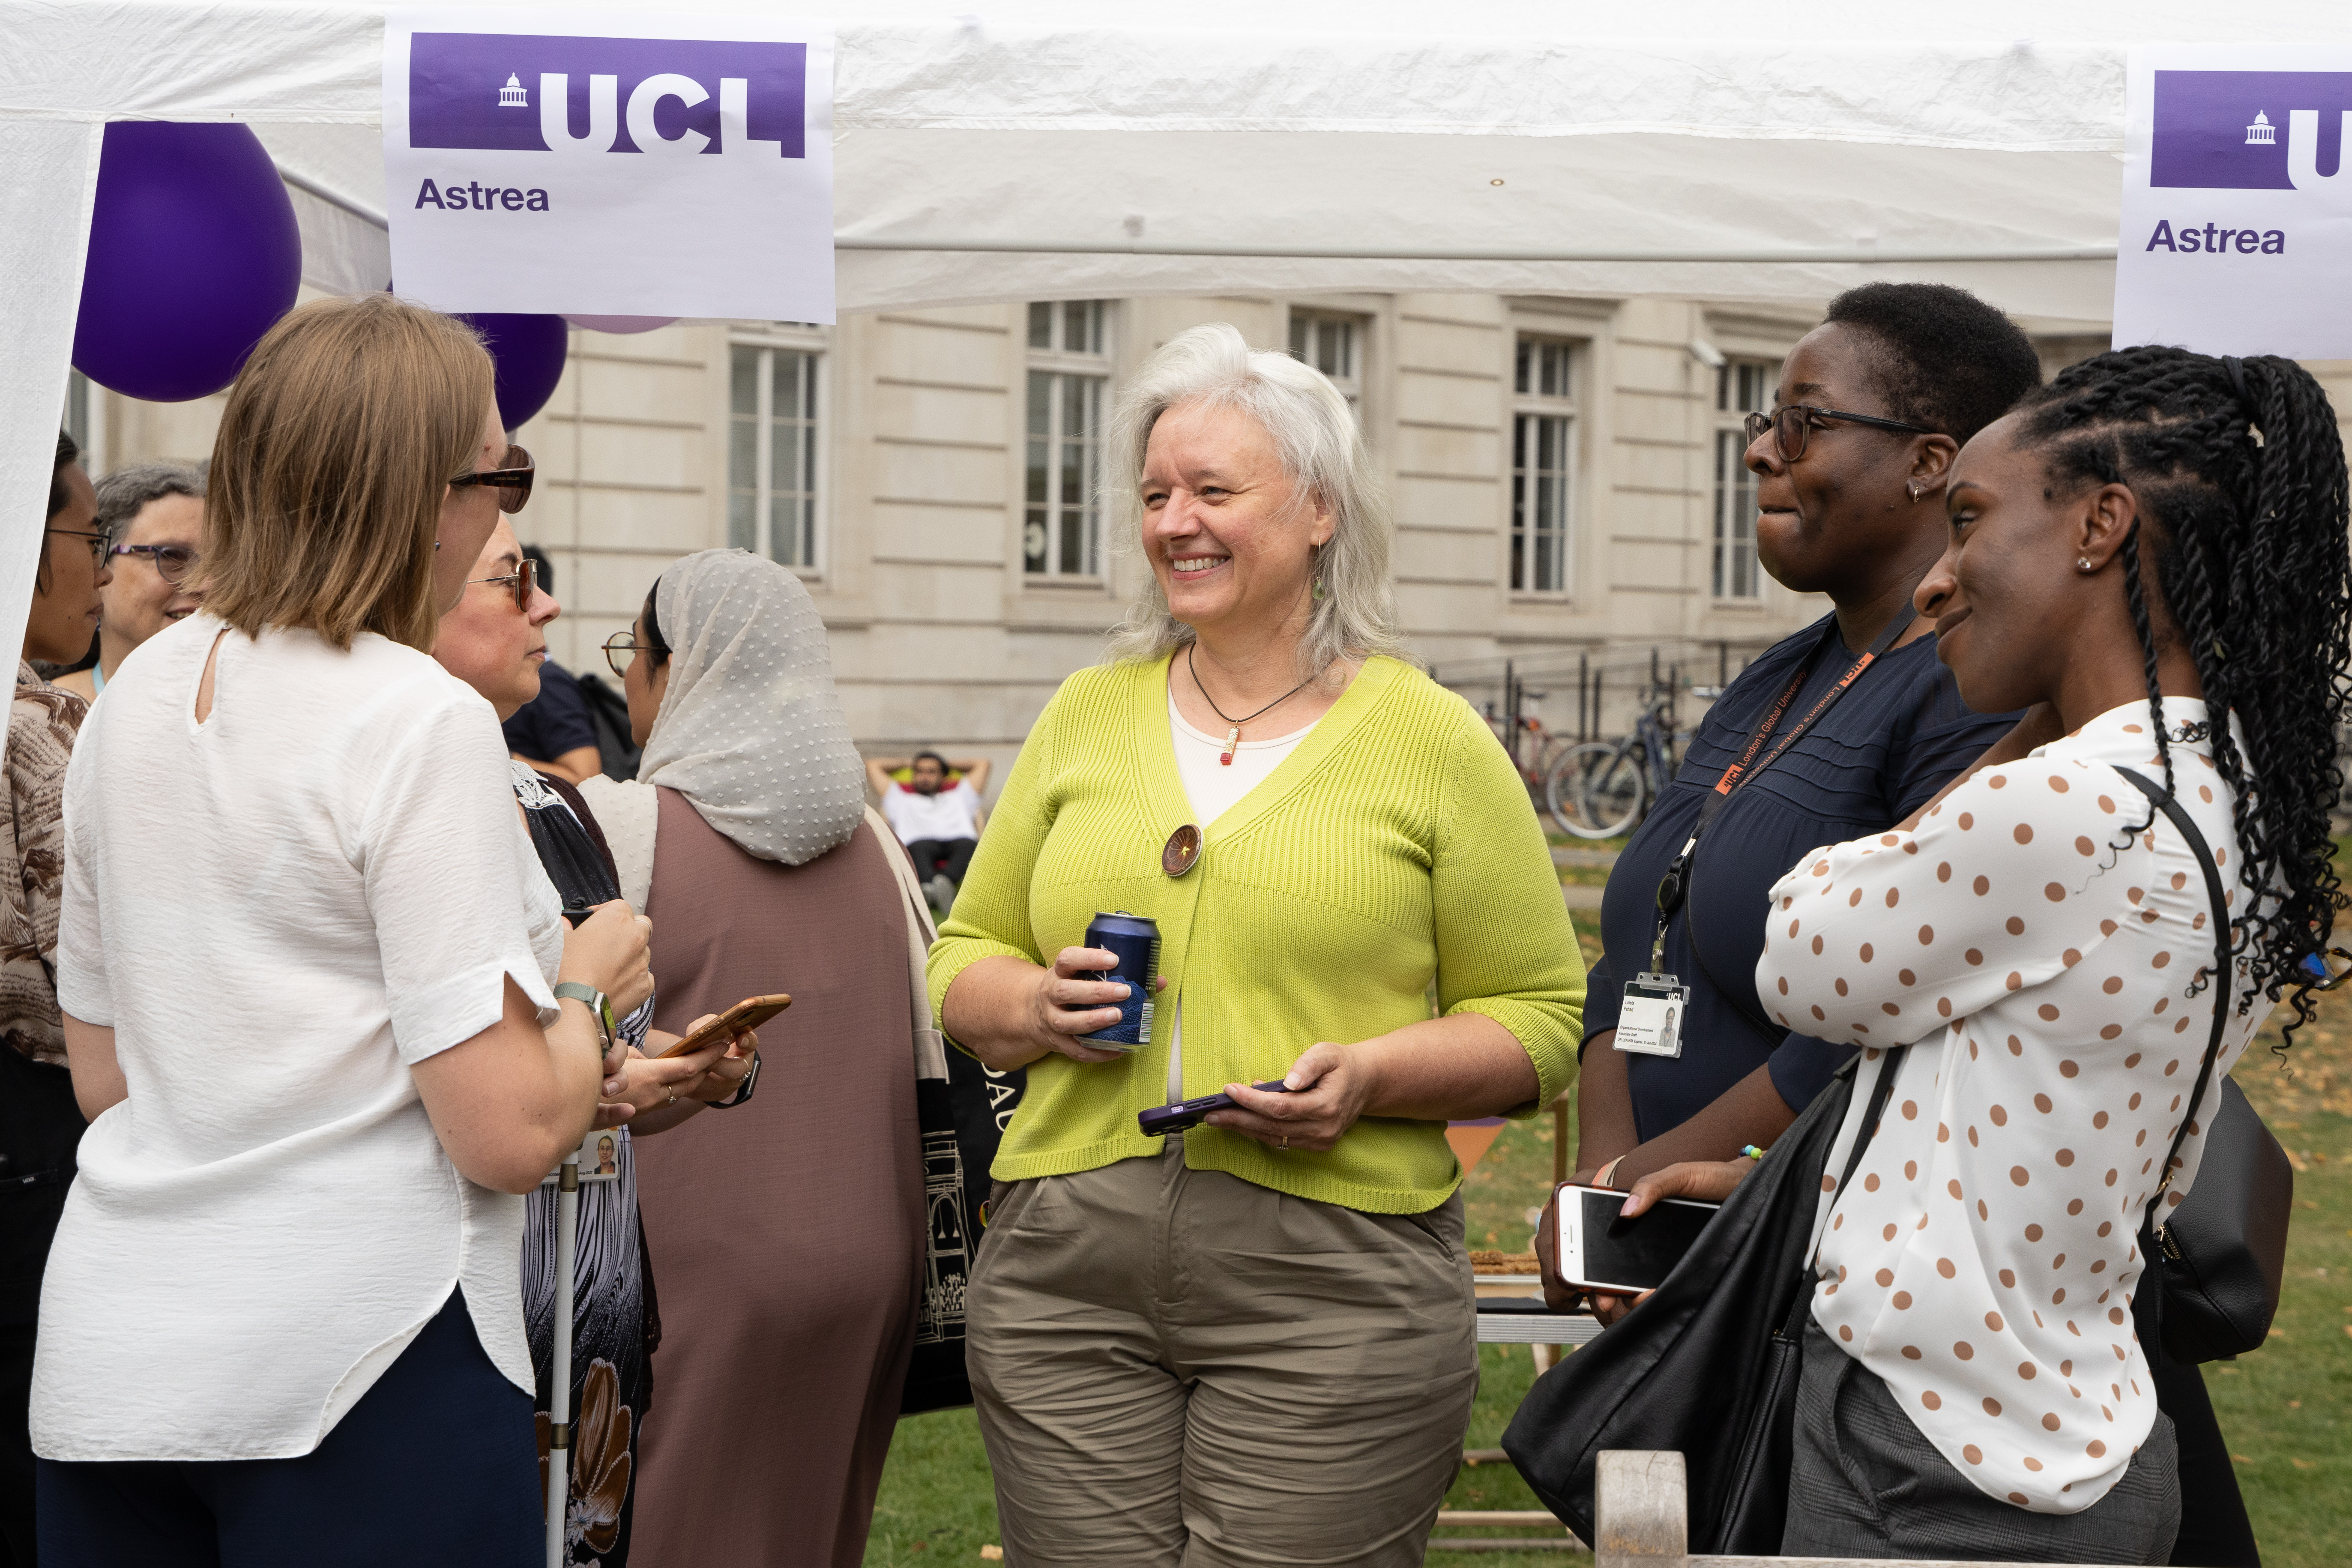 UCL Astrea seeking new Budget Lead to join committee